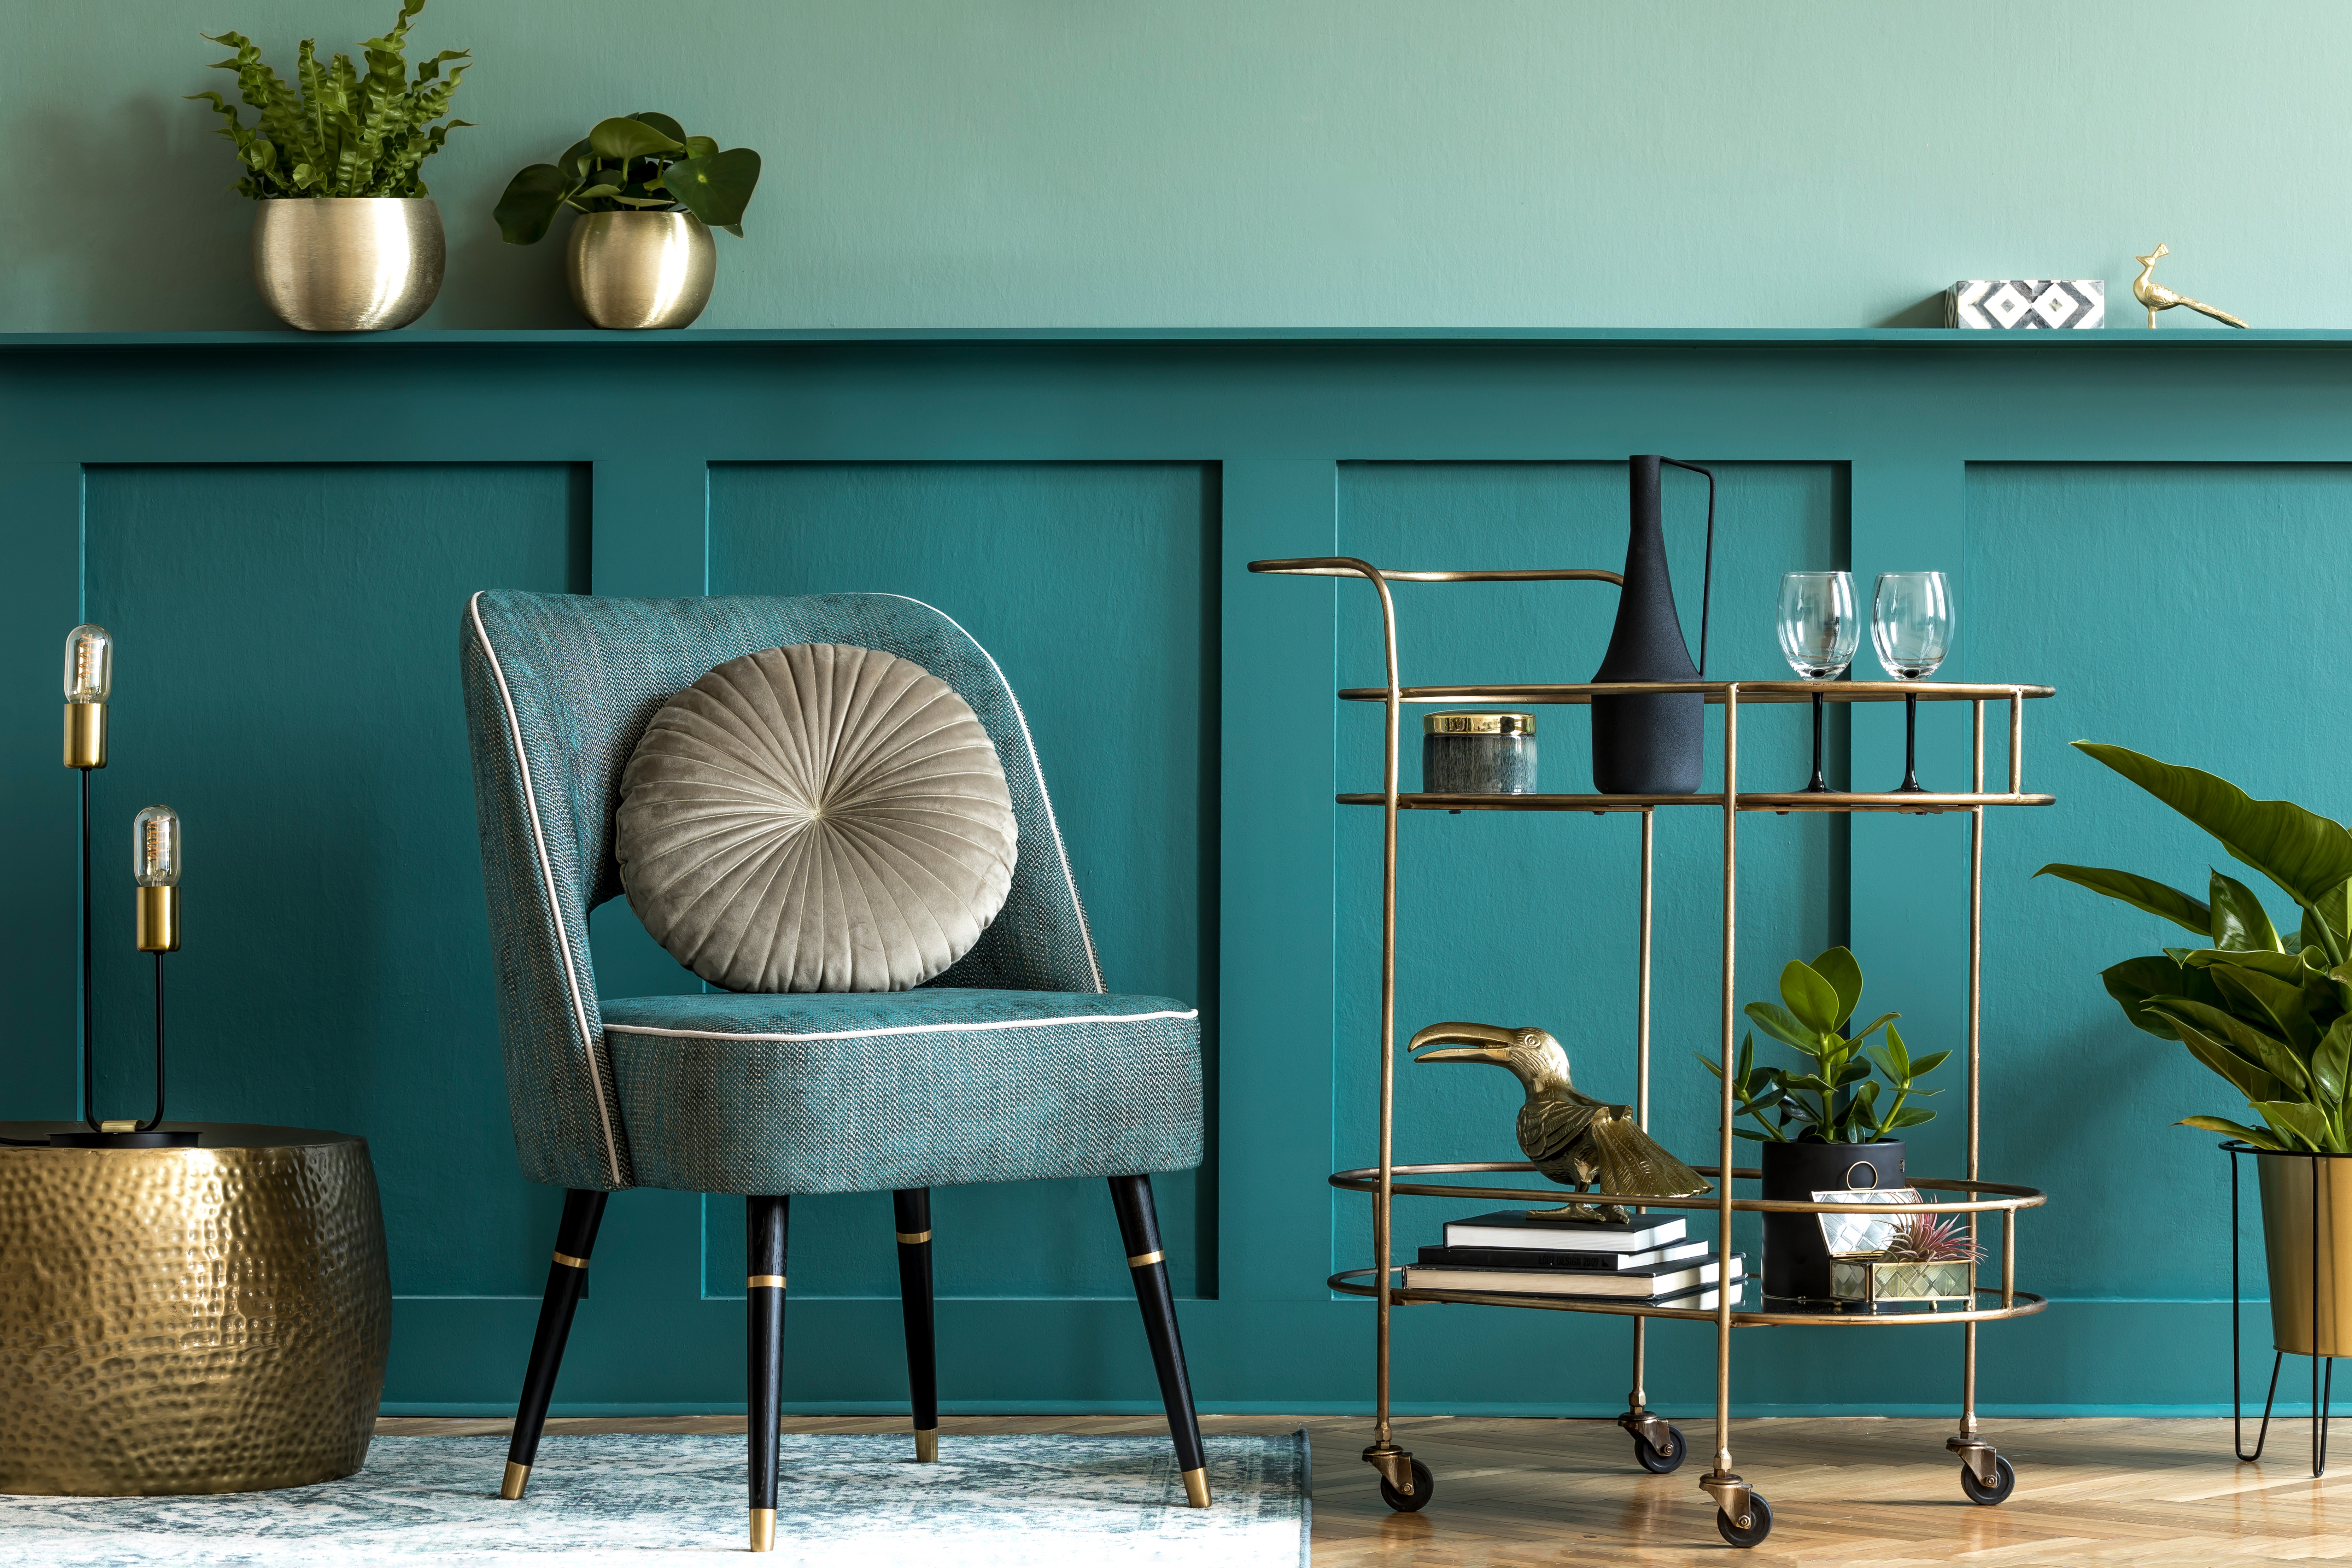 Interiors - what interiors trends do you need to know this year?